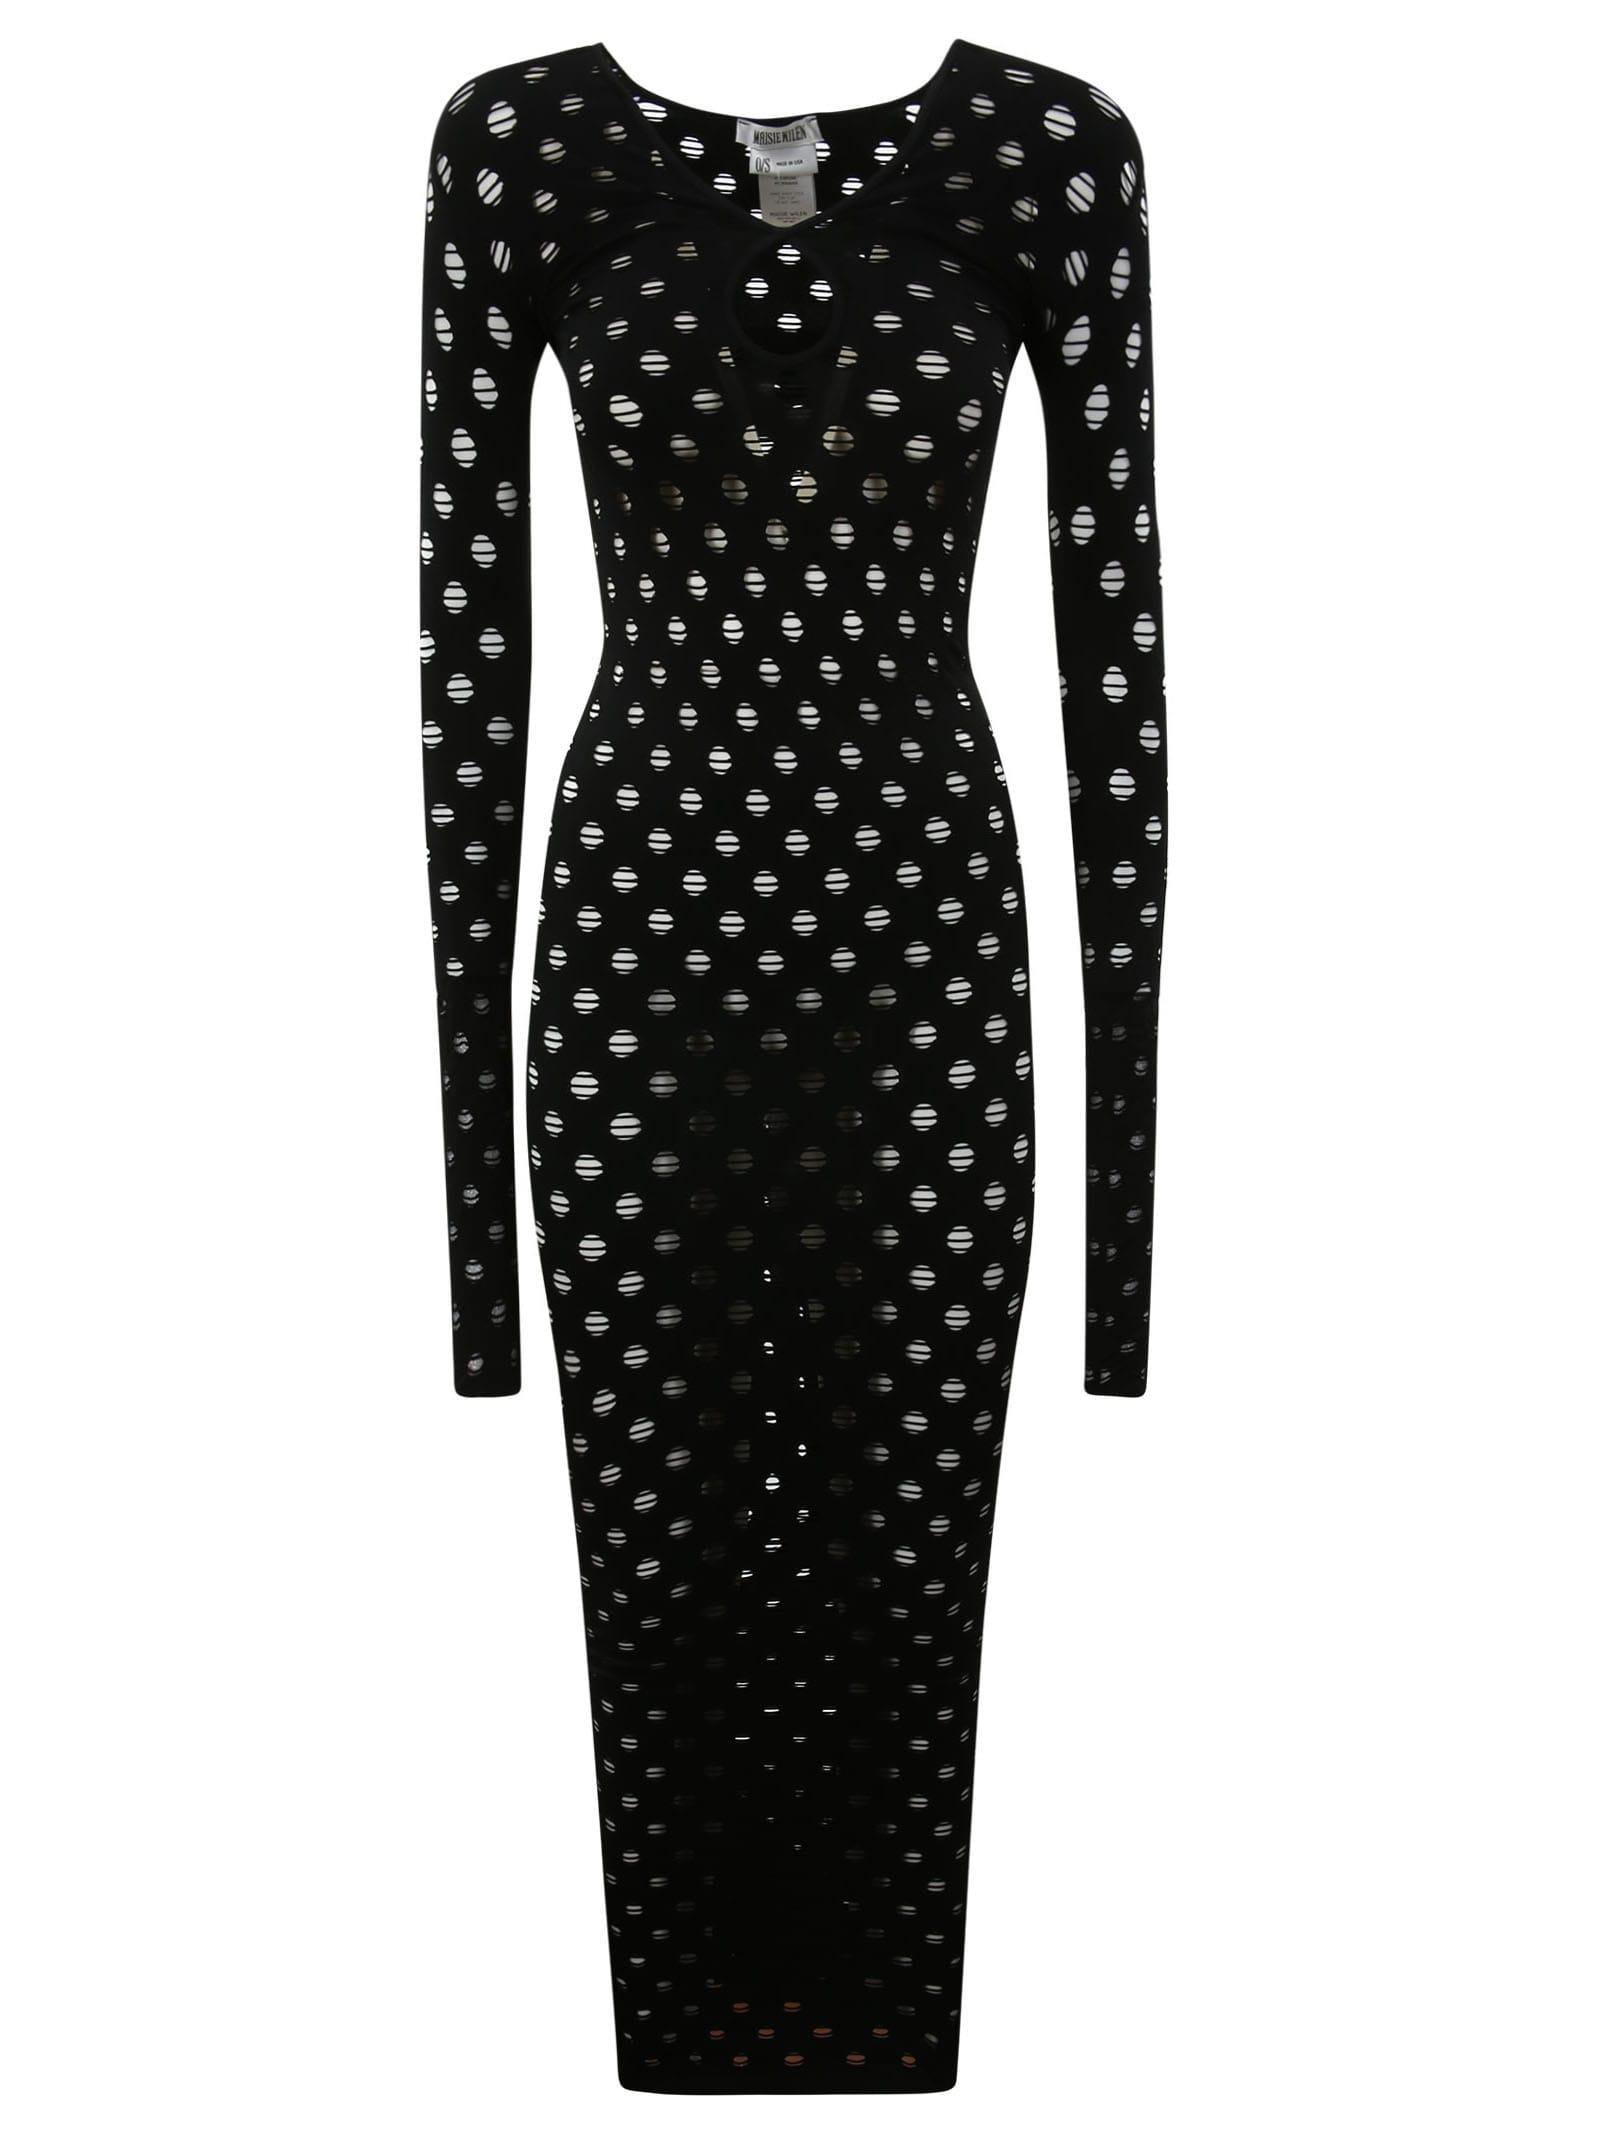 Maisie Wilen Perforated Gown in Black | Lyst